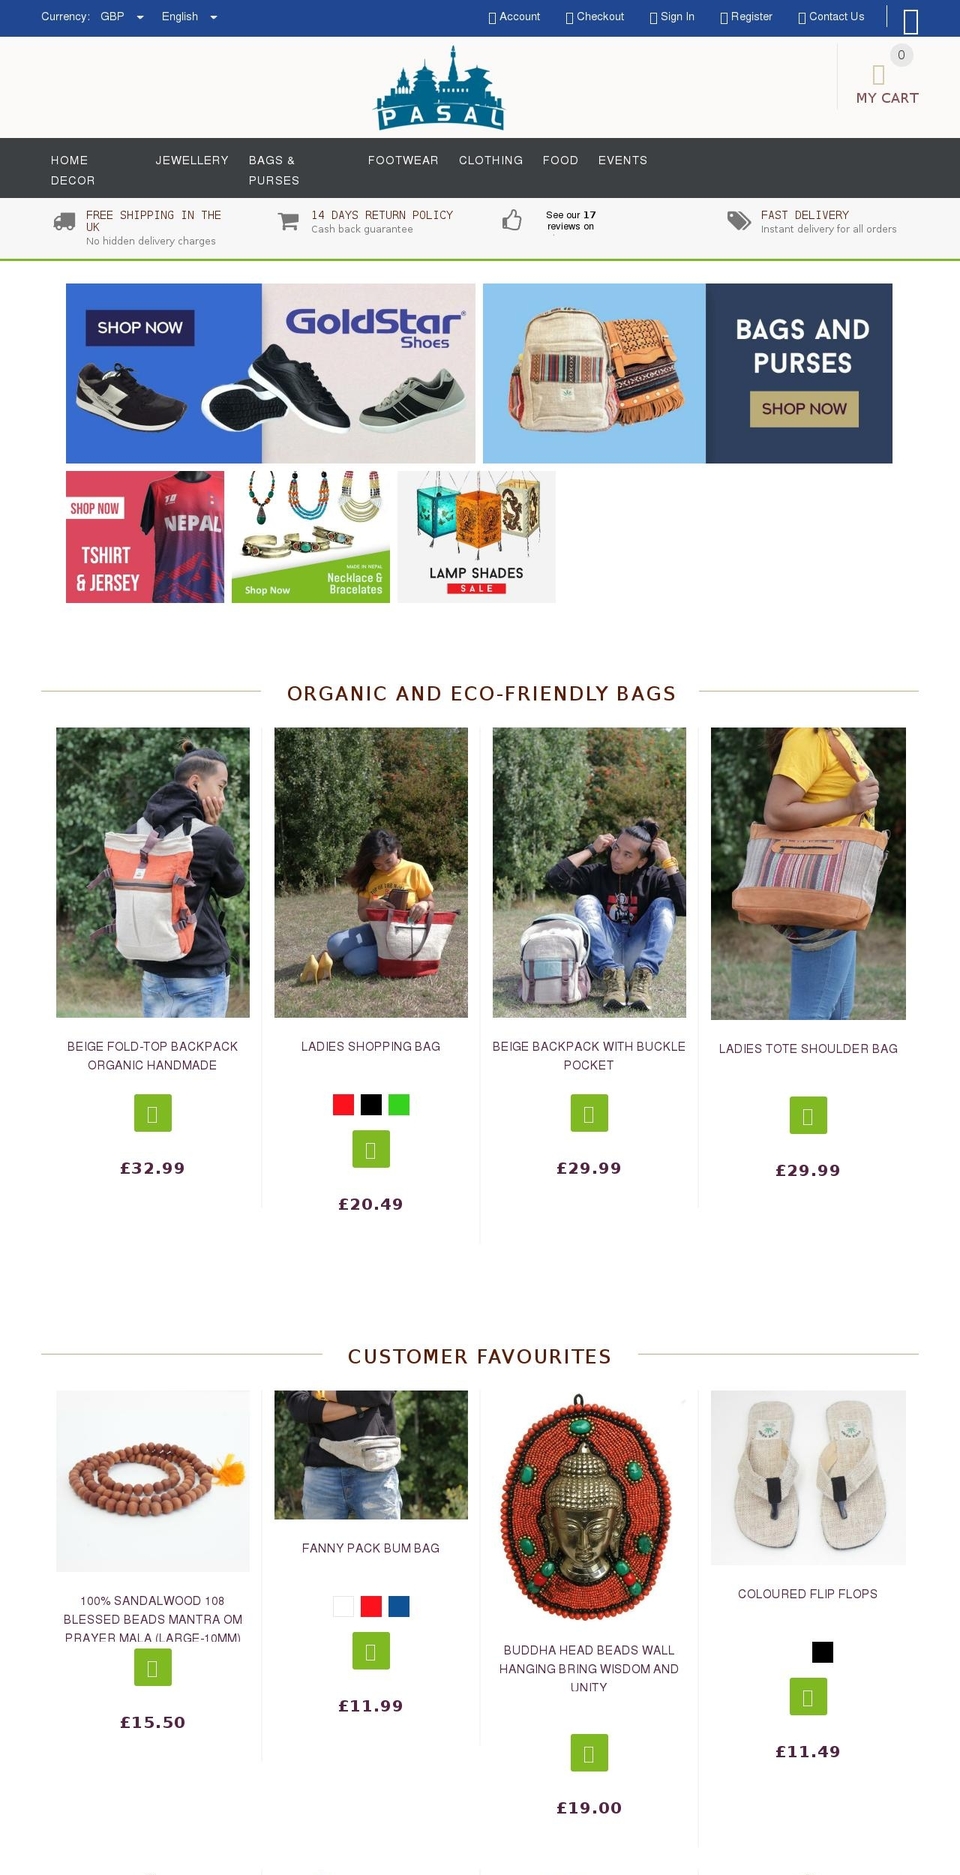 FASTOR Shopify theme site example pasal.co.uk